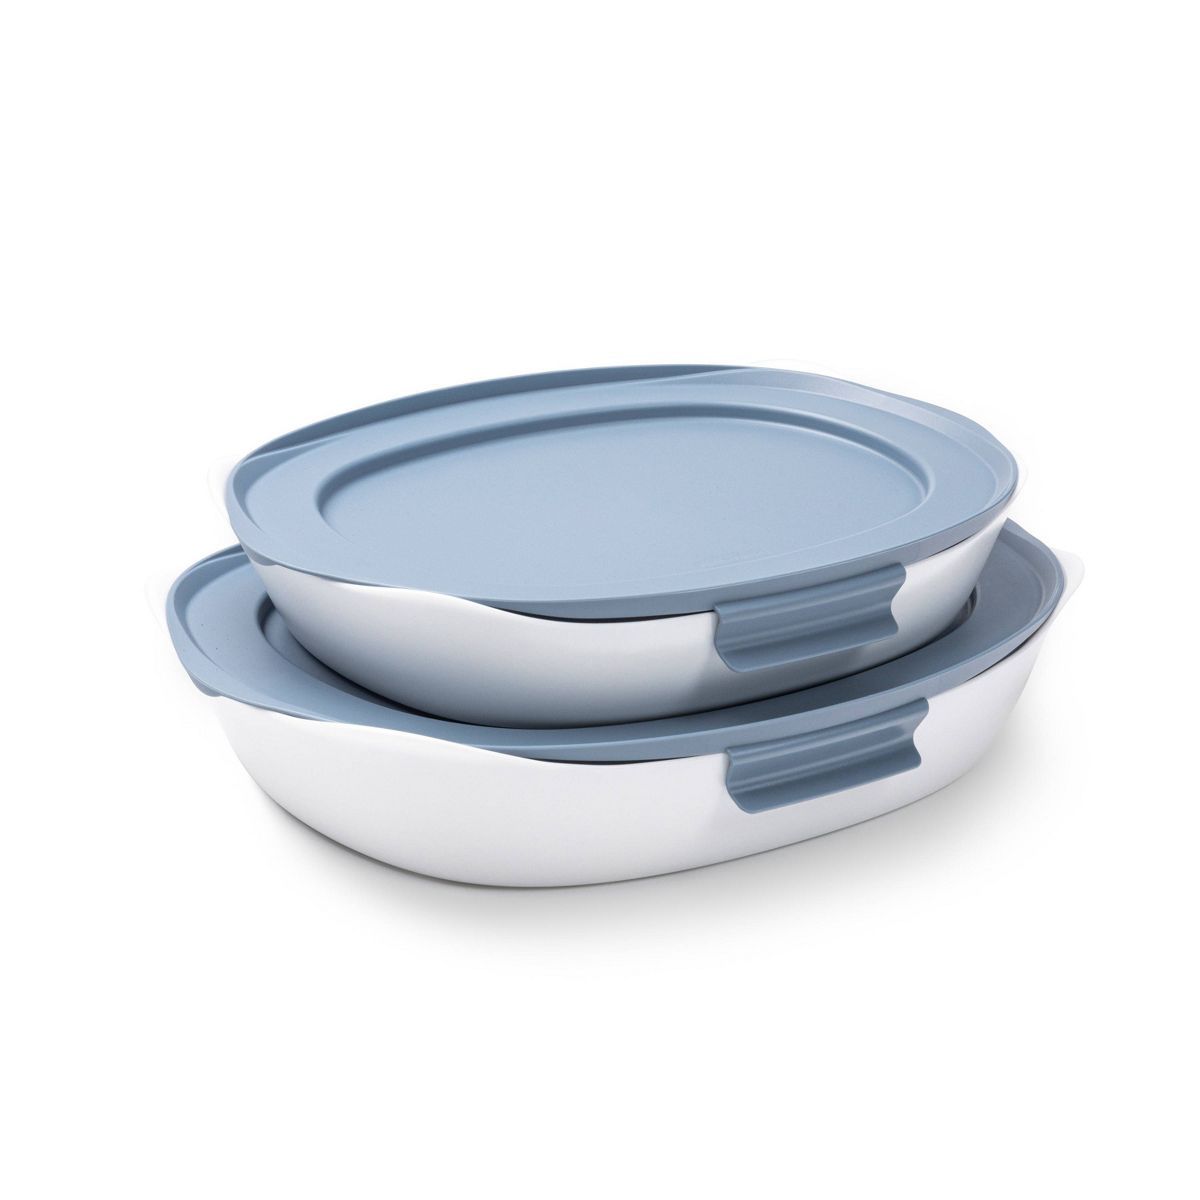 Rubbermaid DuraLite Glass Bakeware 4pc (1.5qt and 2.5qt) Baking Dish Set with Shadow Blue Lids | Target